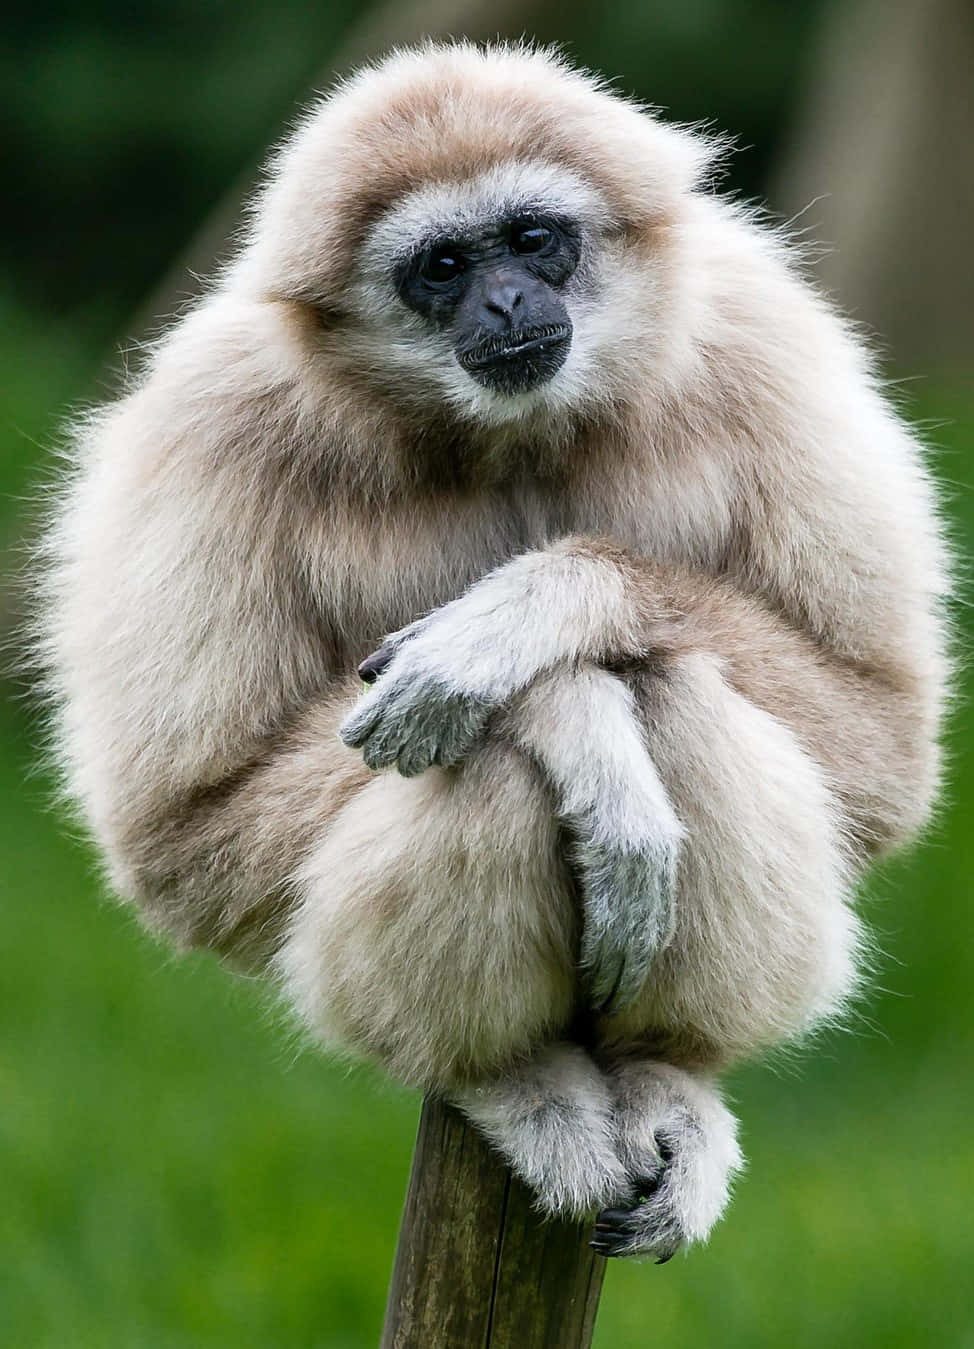 Enjoy an Android Gibbon background on your phone and tablet